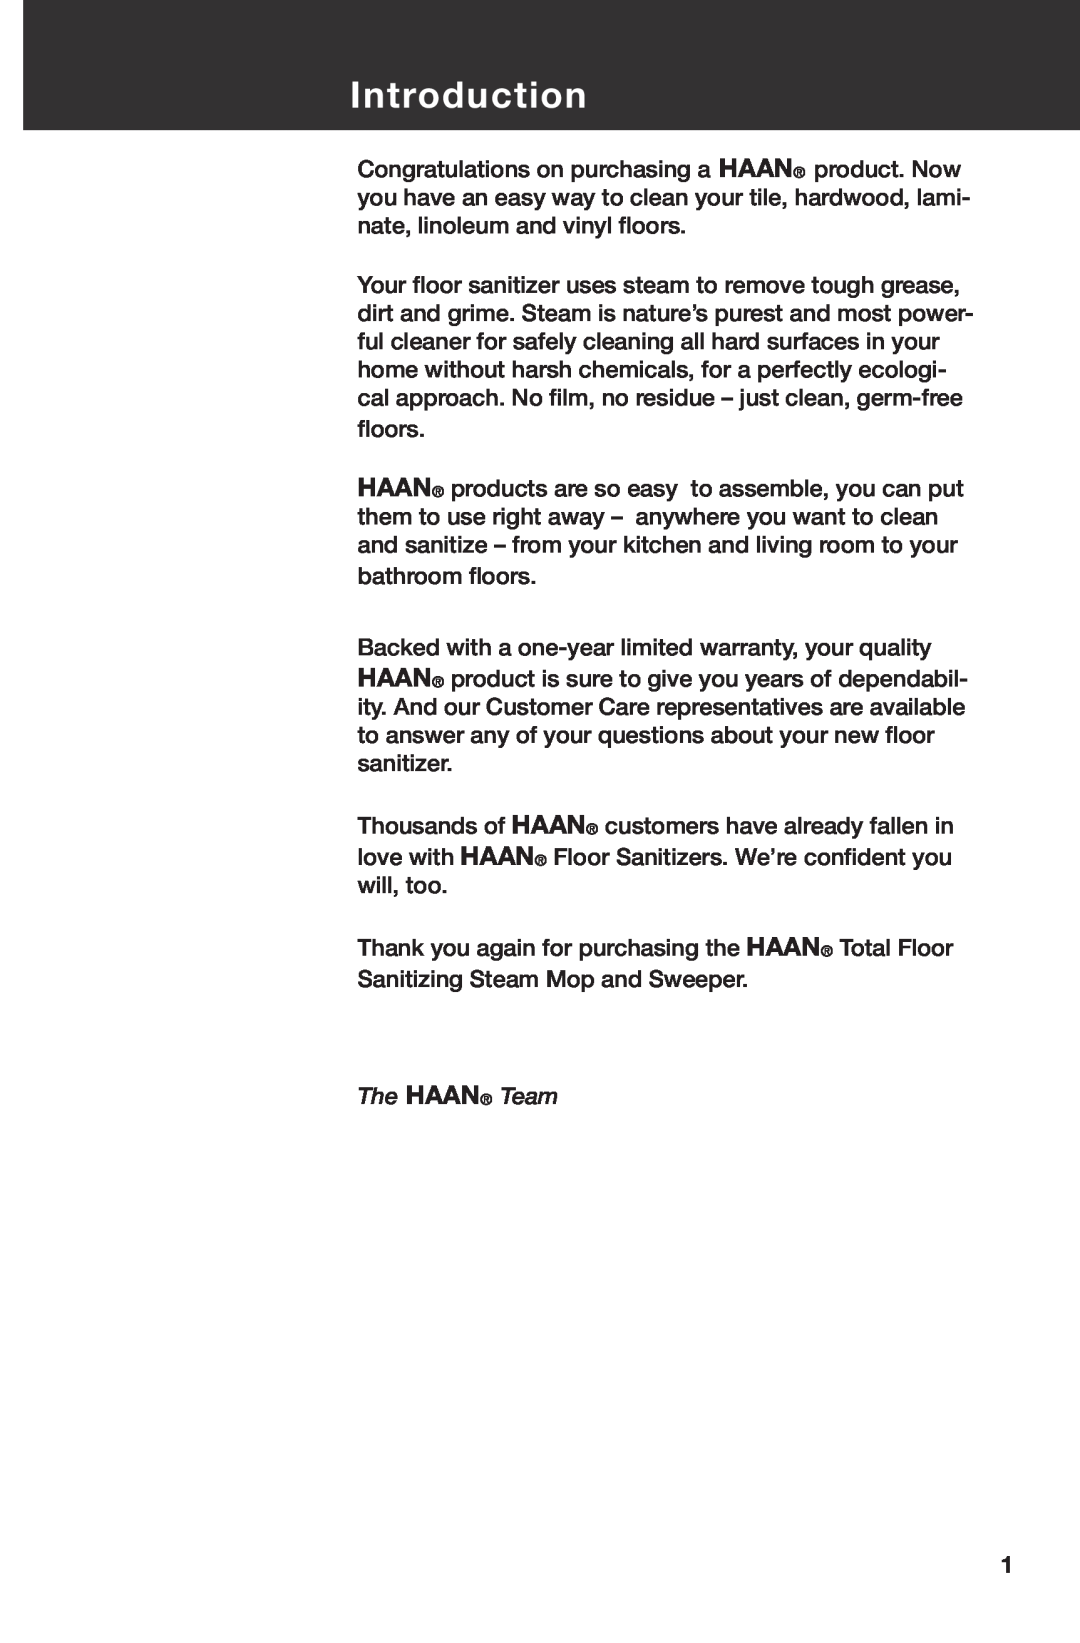 Haan HD-60 instruction manual Introduction, The HAAN Team 